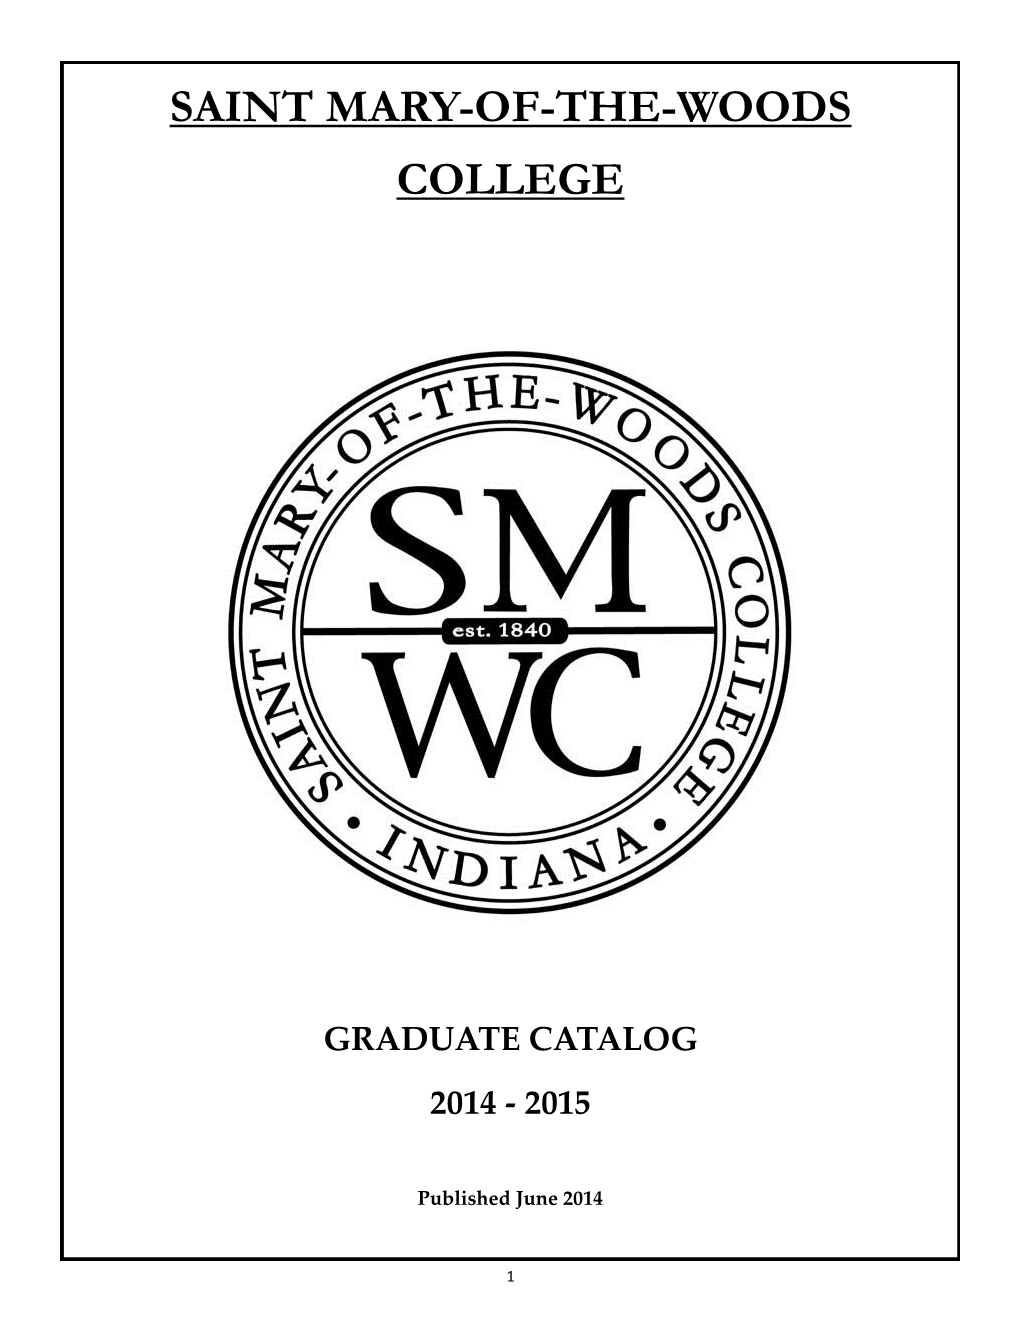 Saint Mary-Of-The-Woods College Graduate Catalog 2014